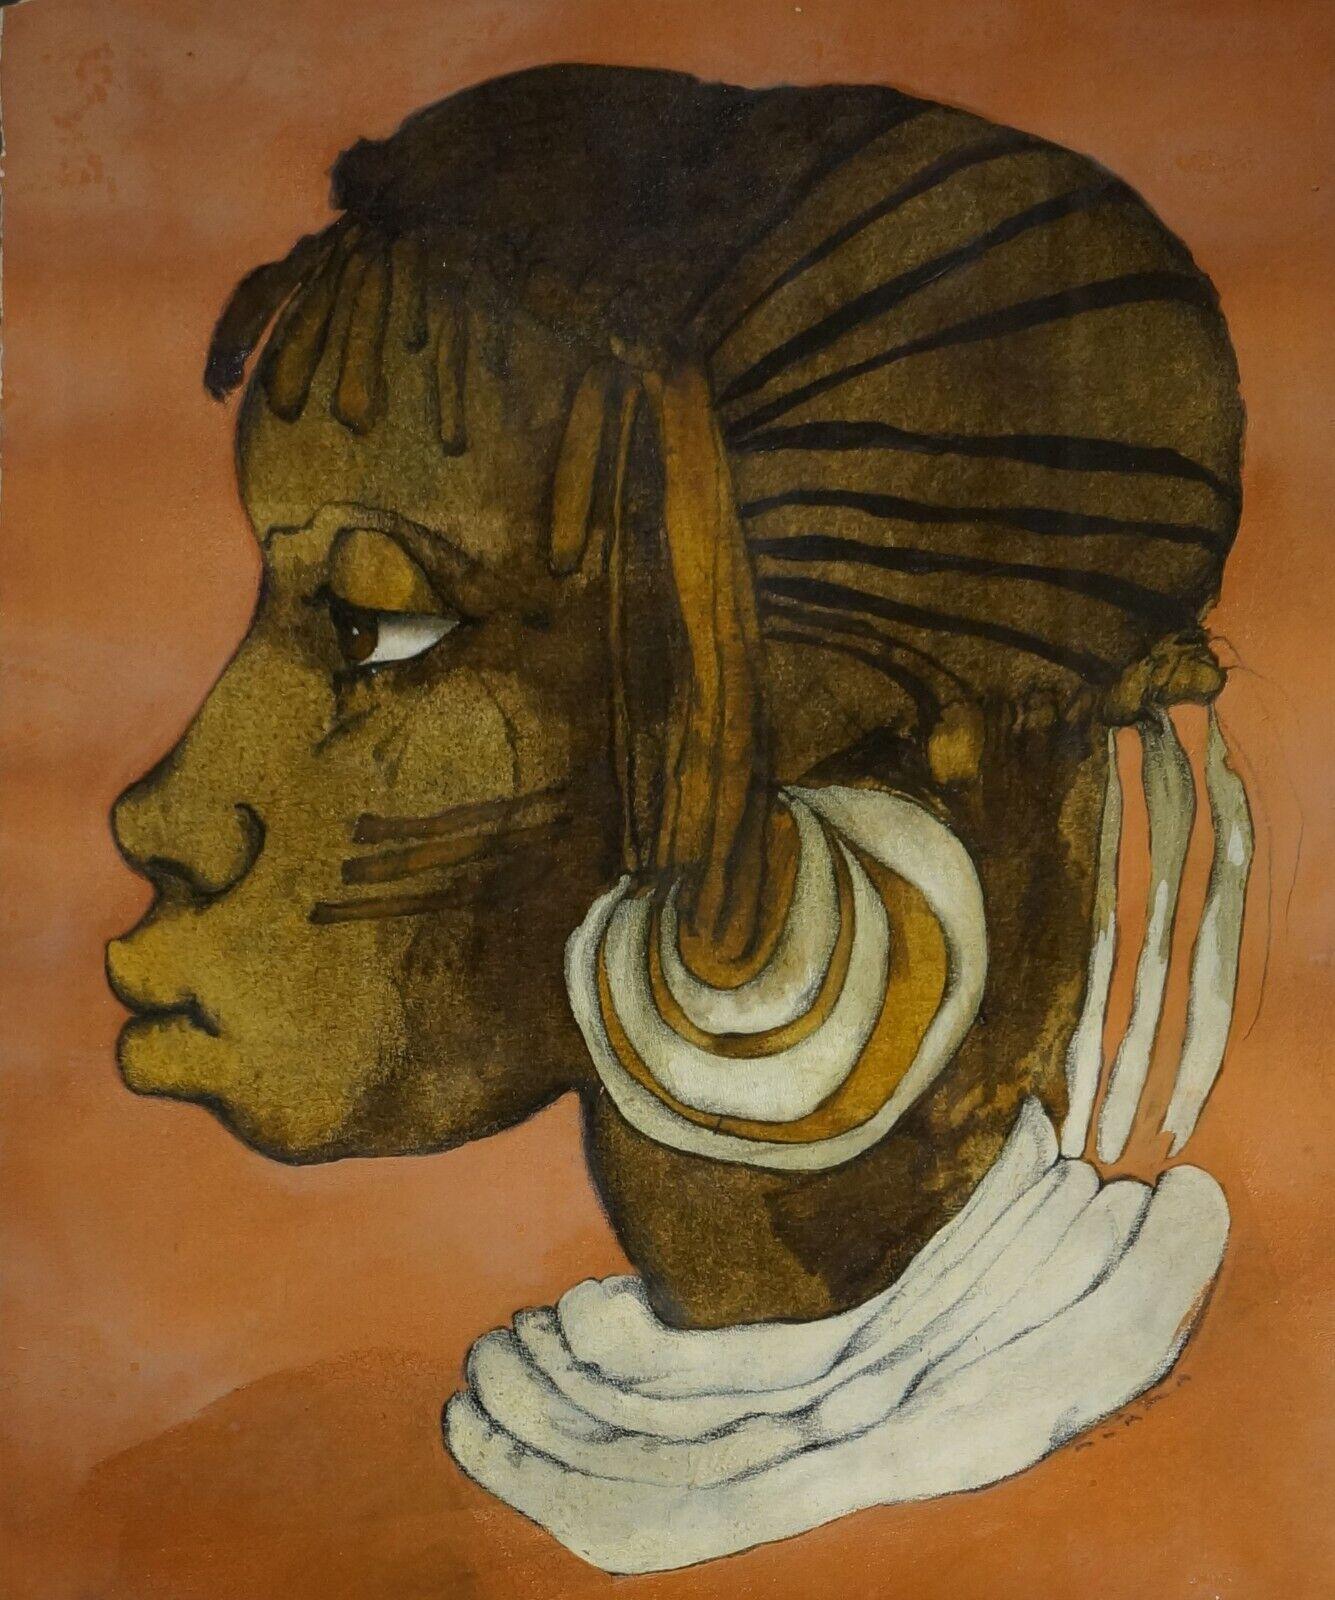 Machiel Hopman (1928–2001) 
Portrait of an African woman 
Signed bottom right Nzama (pseudonym) 
Oil on paper 
Dimensions: approx. 39 x 32 cm. (excl. passe-partout and frame)

In his native city of The Hague, he studied at the Academy of Fine Arts